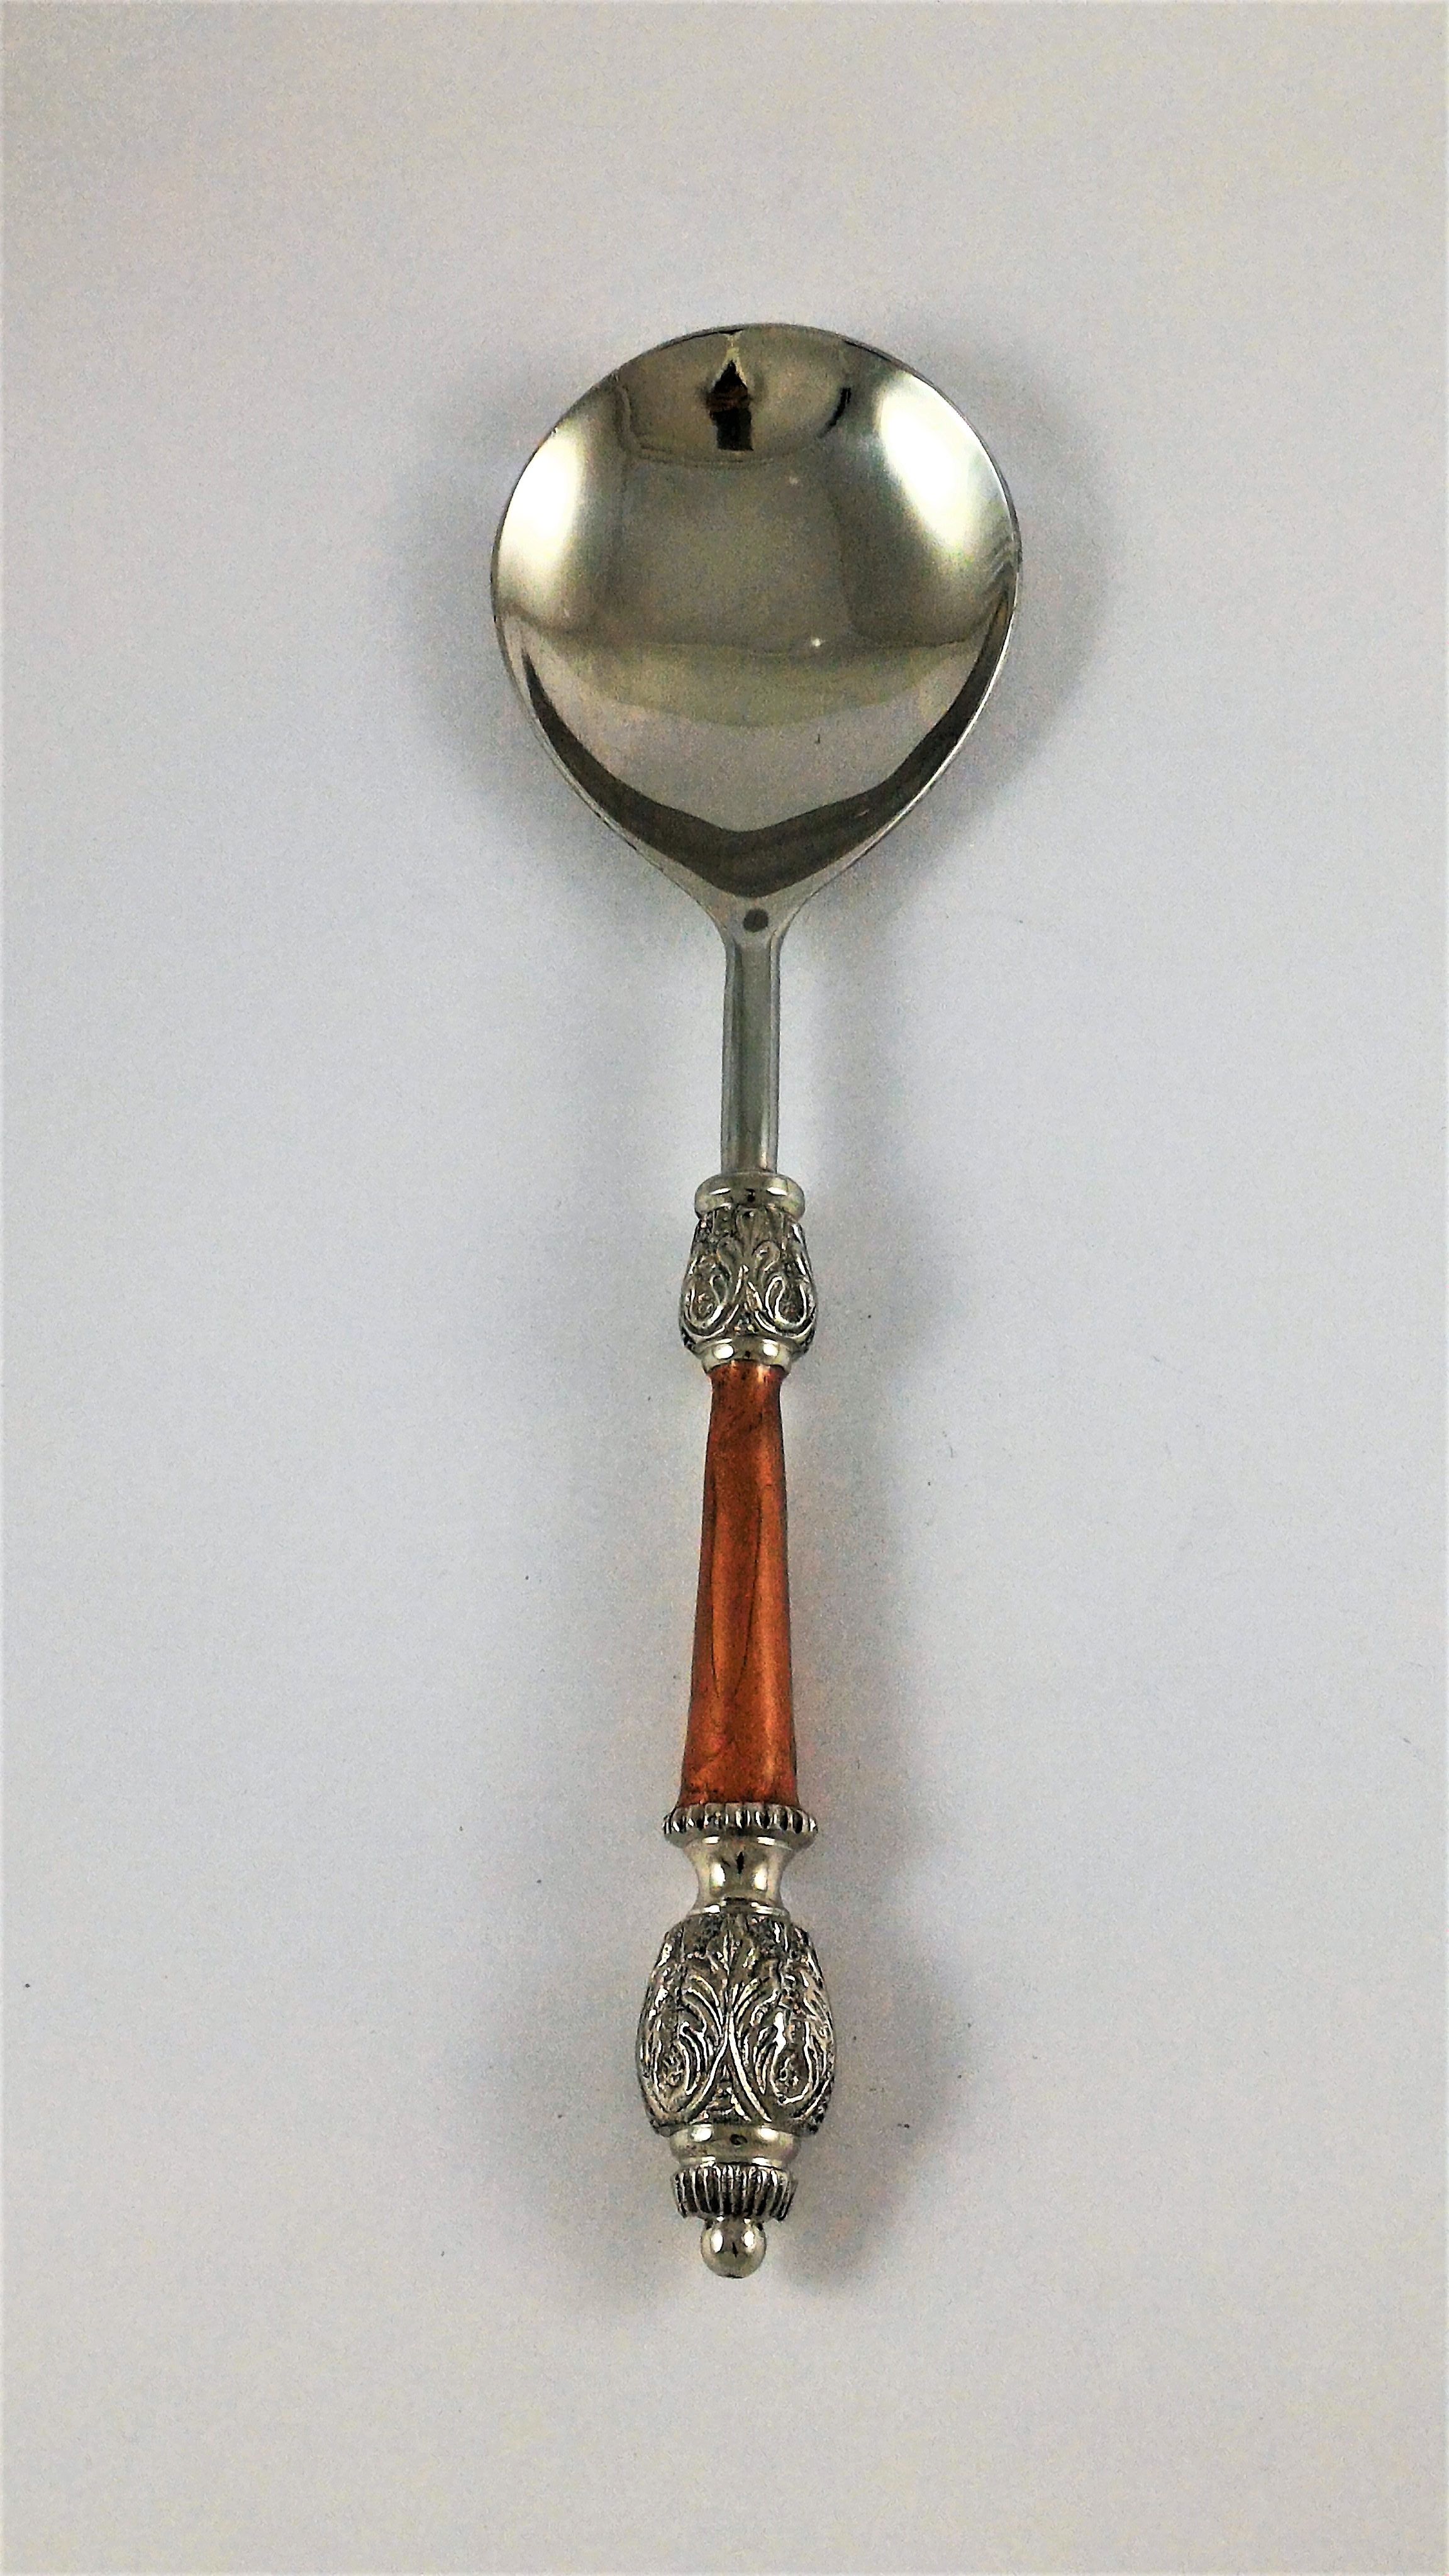 Serving spoon with copper color